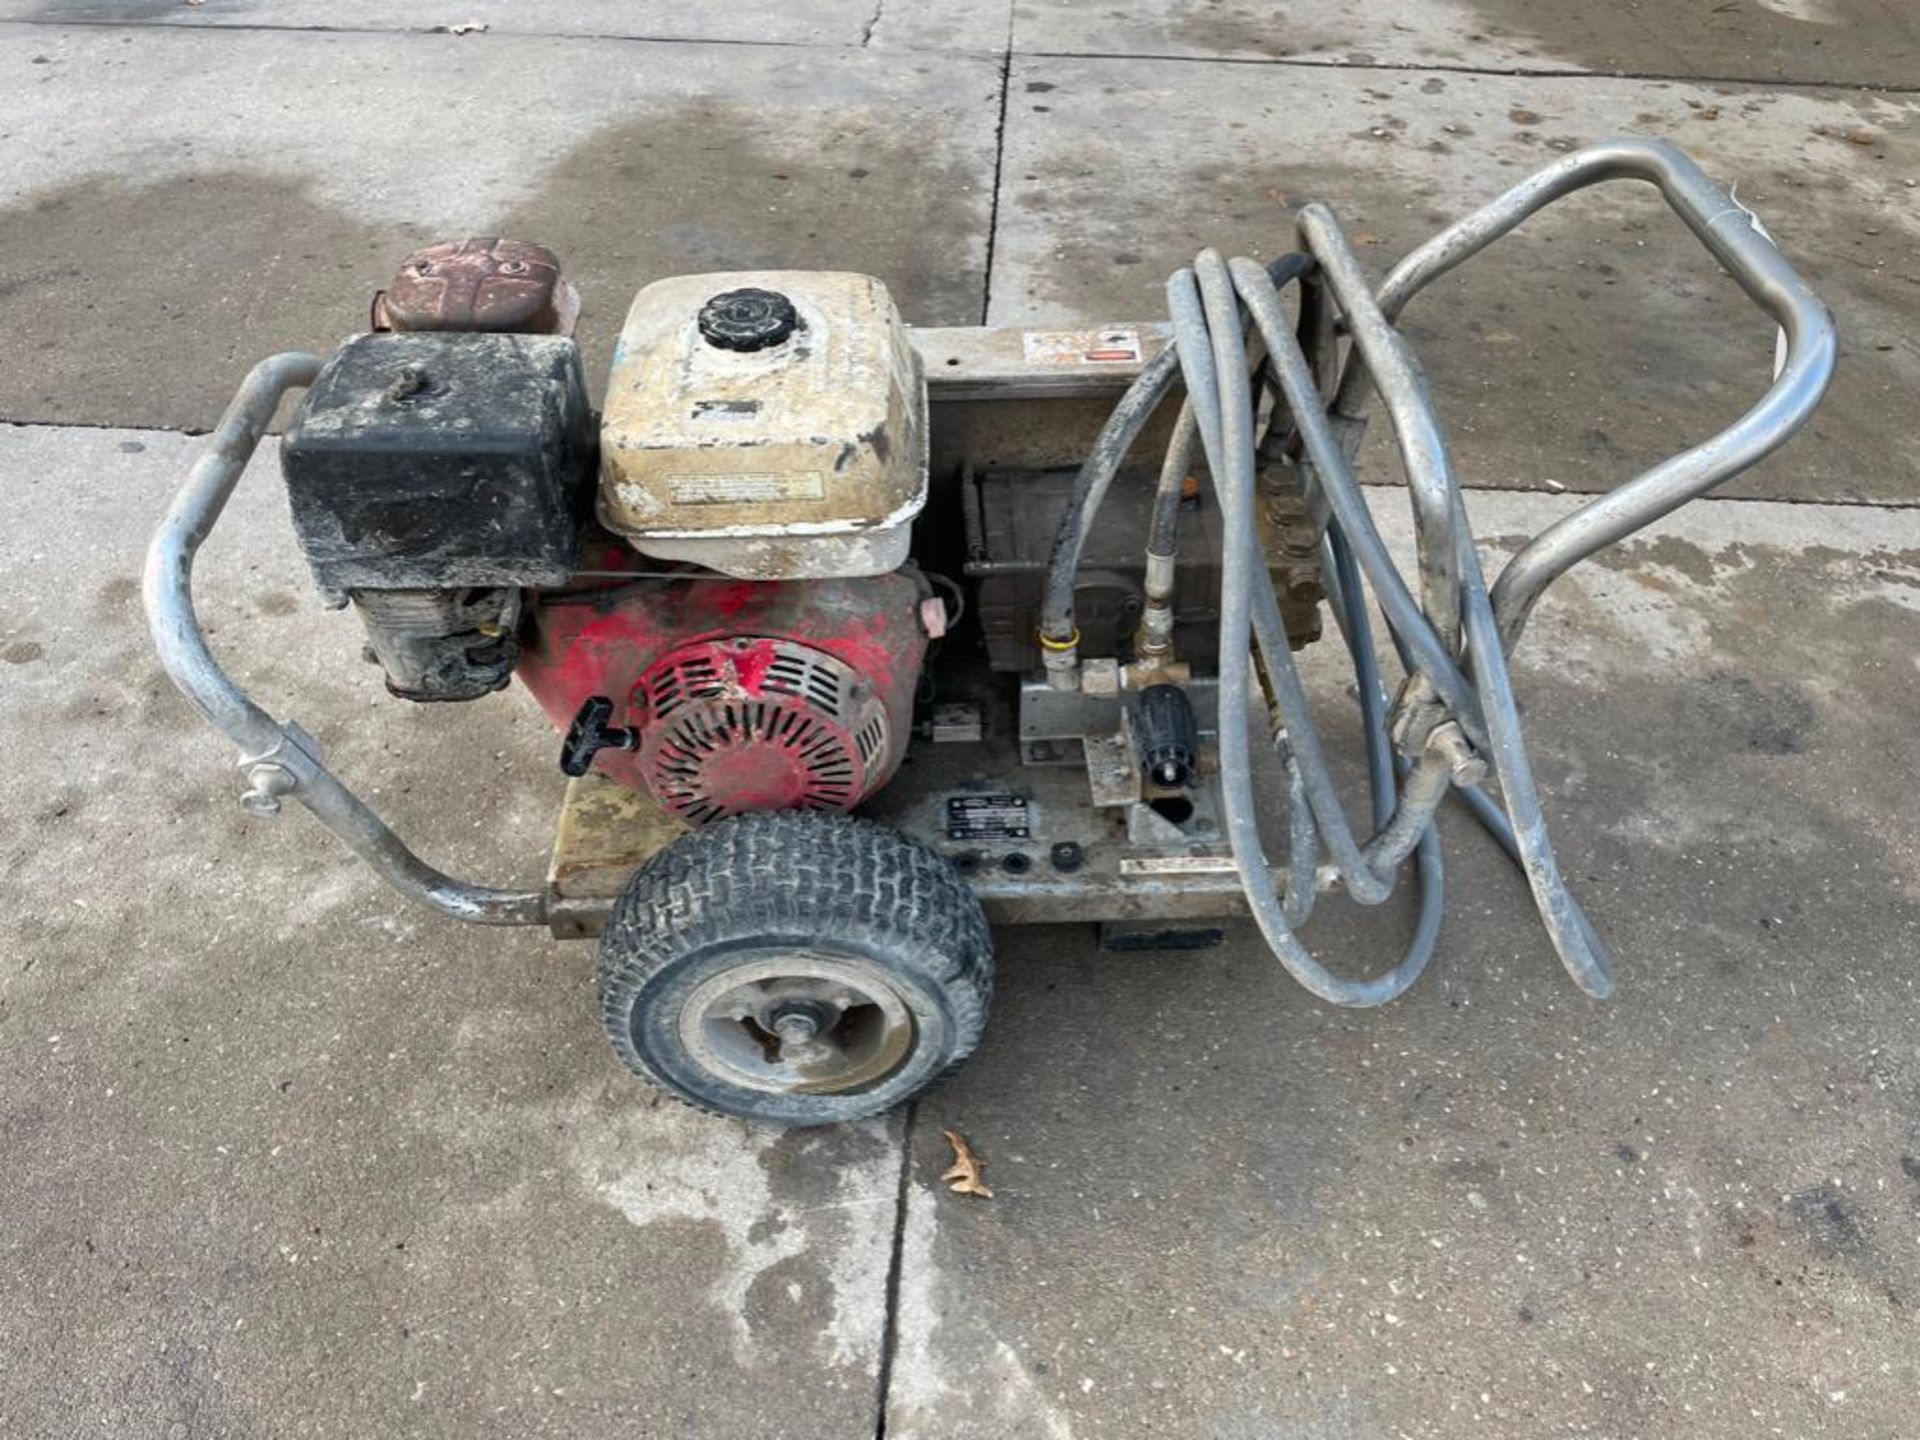 Bulldog Industrial Power Washer, Model SW 3000 GHS, Serial #9703509, 3200 RPM, 3000 PSI. Located in